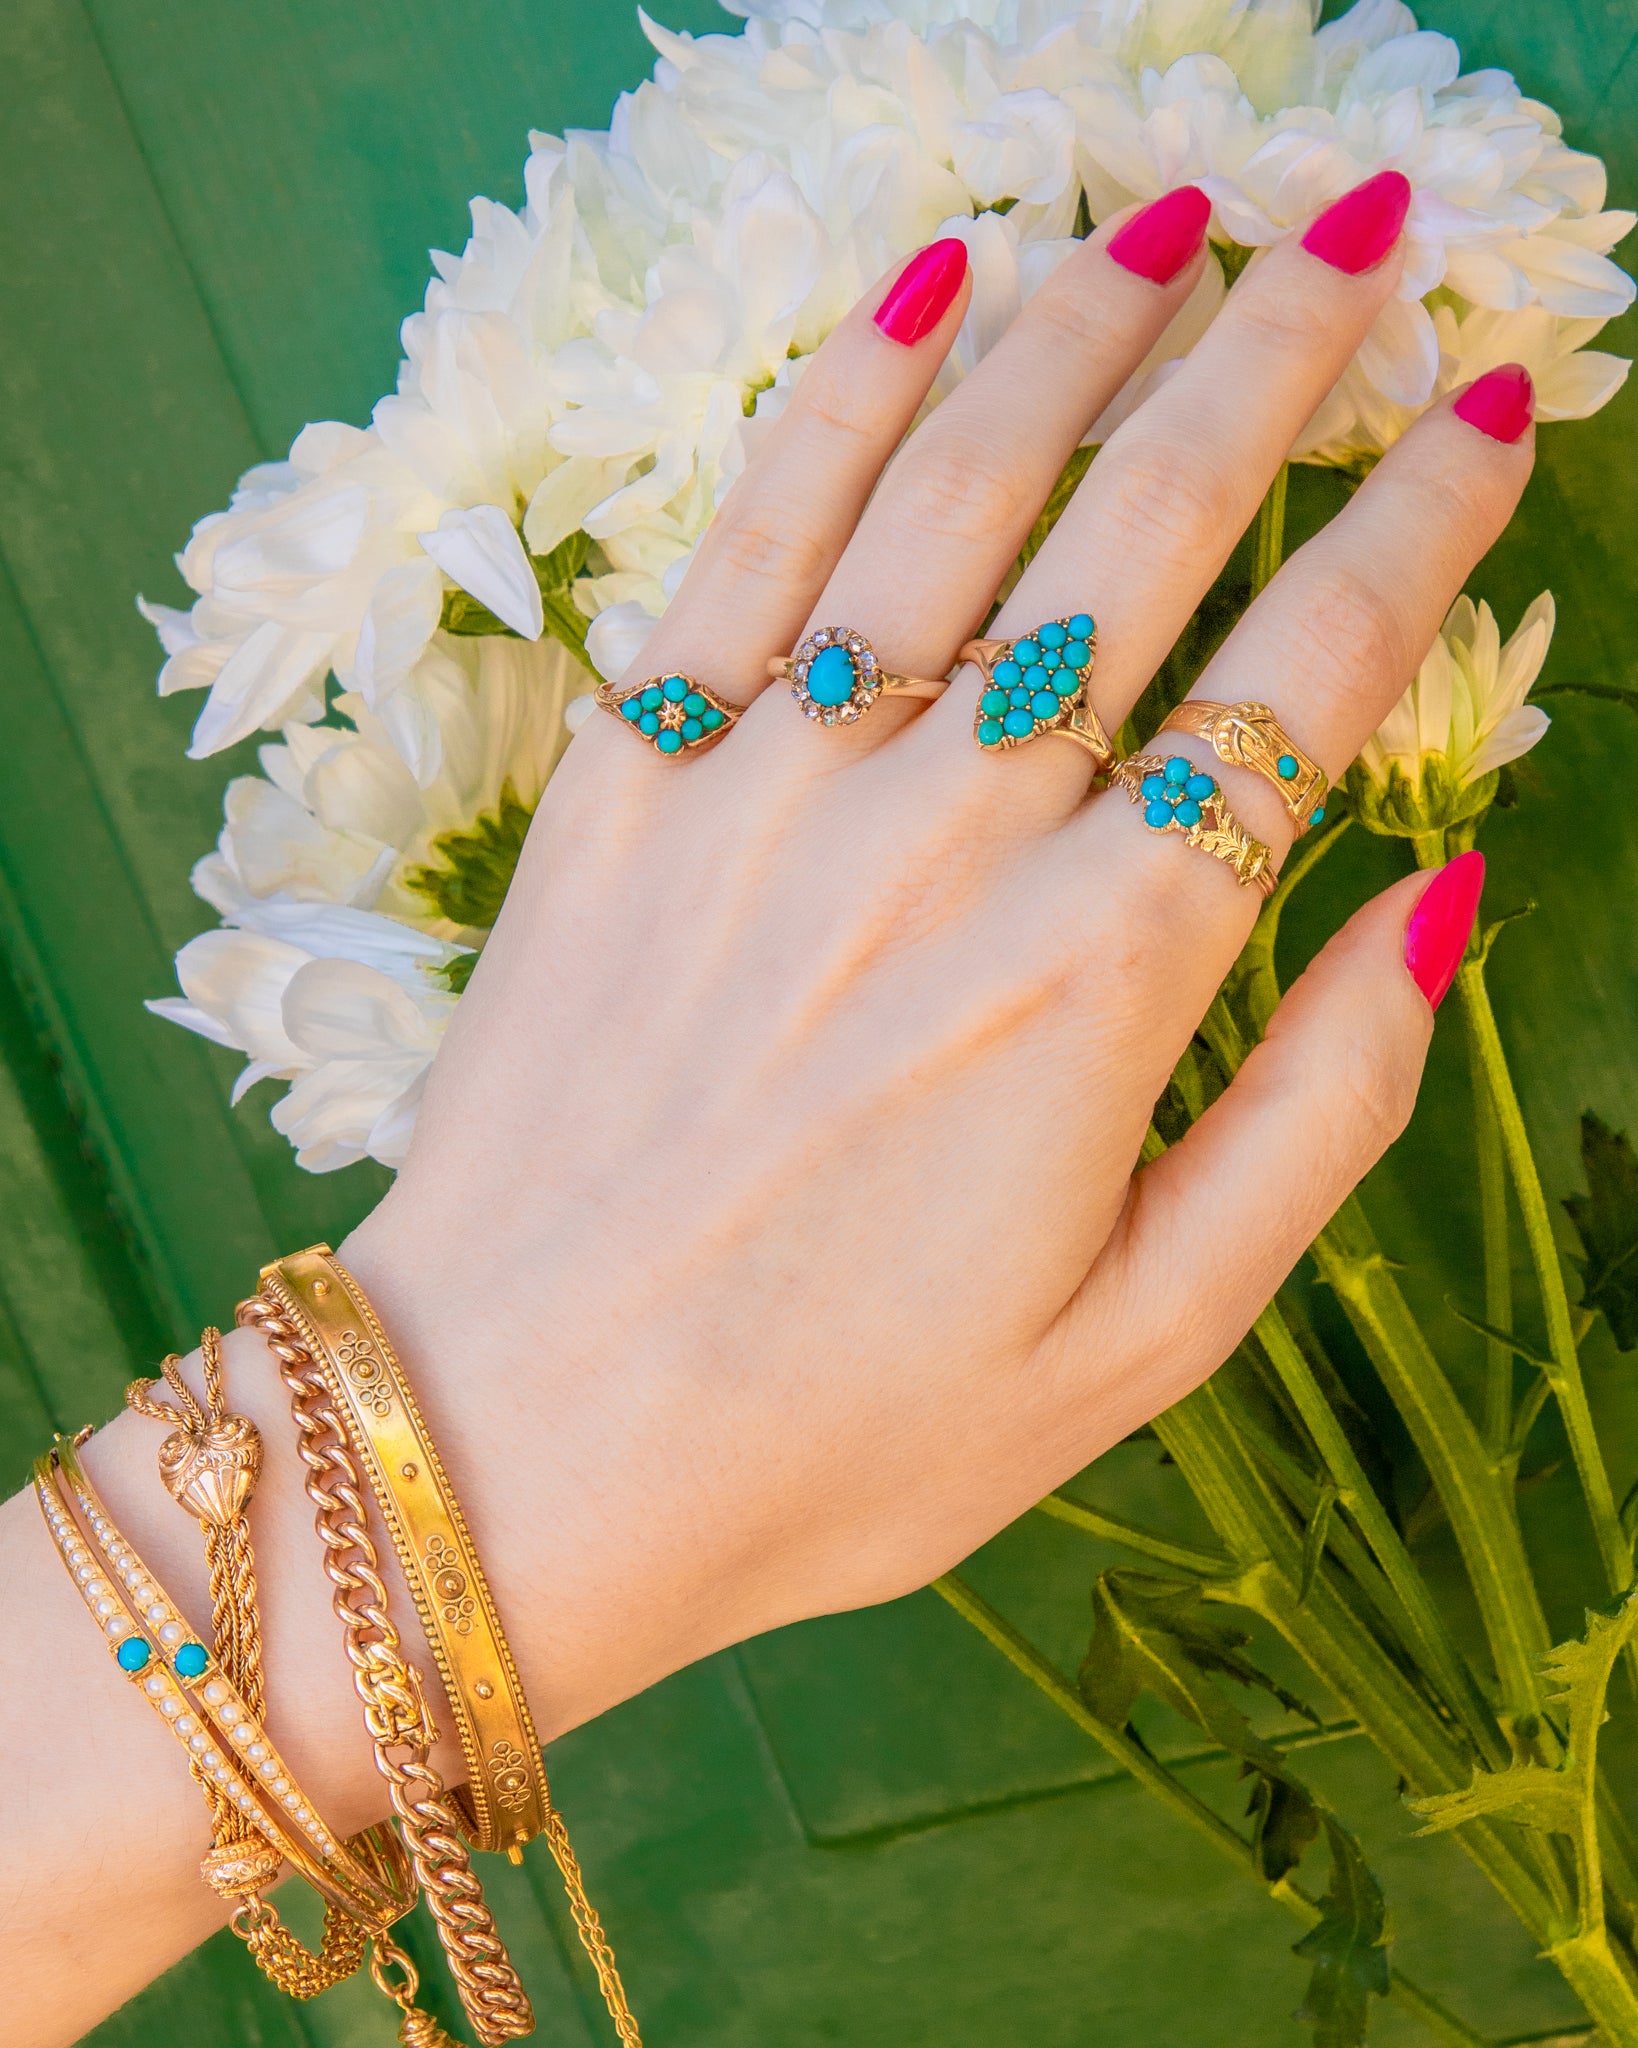 Hand holding Turquoise rings and wearing Gold bracelets